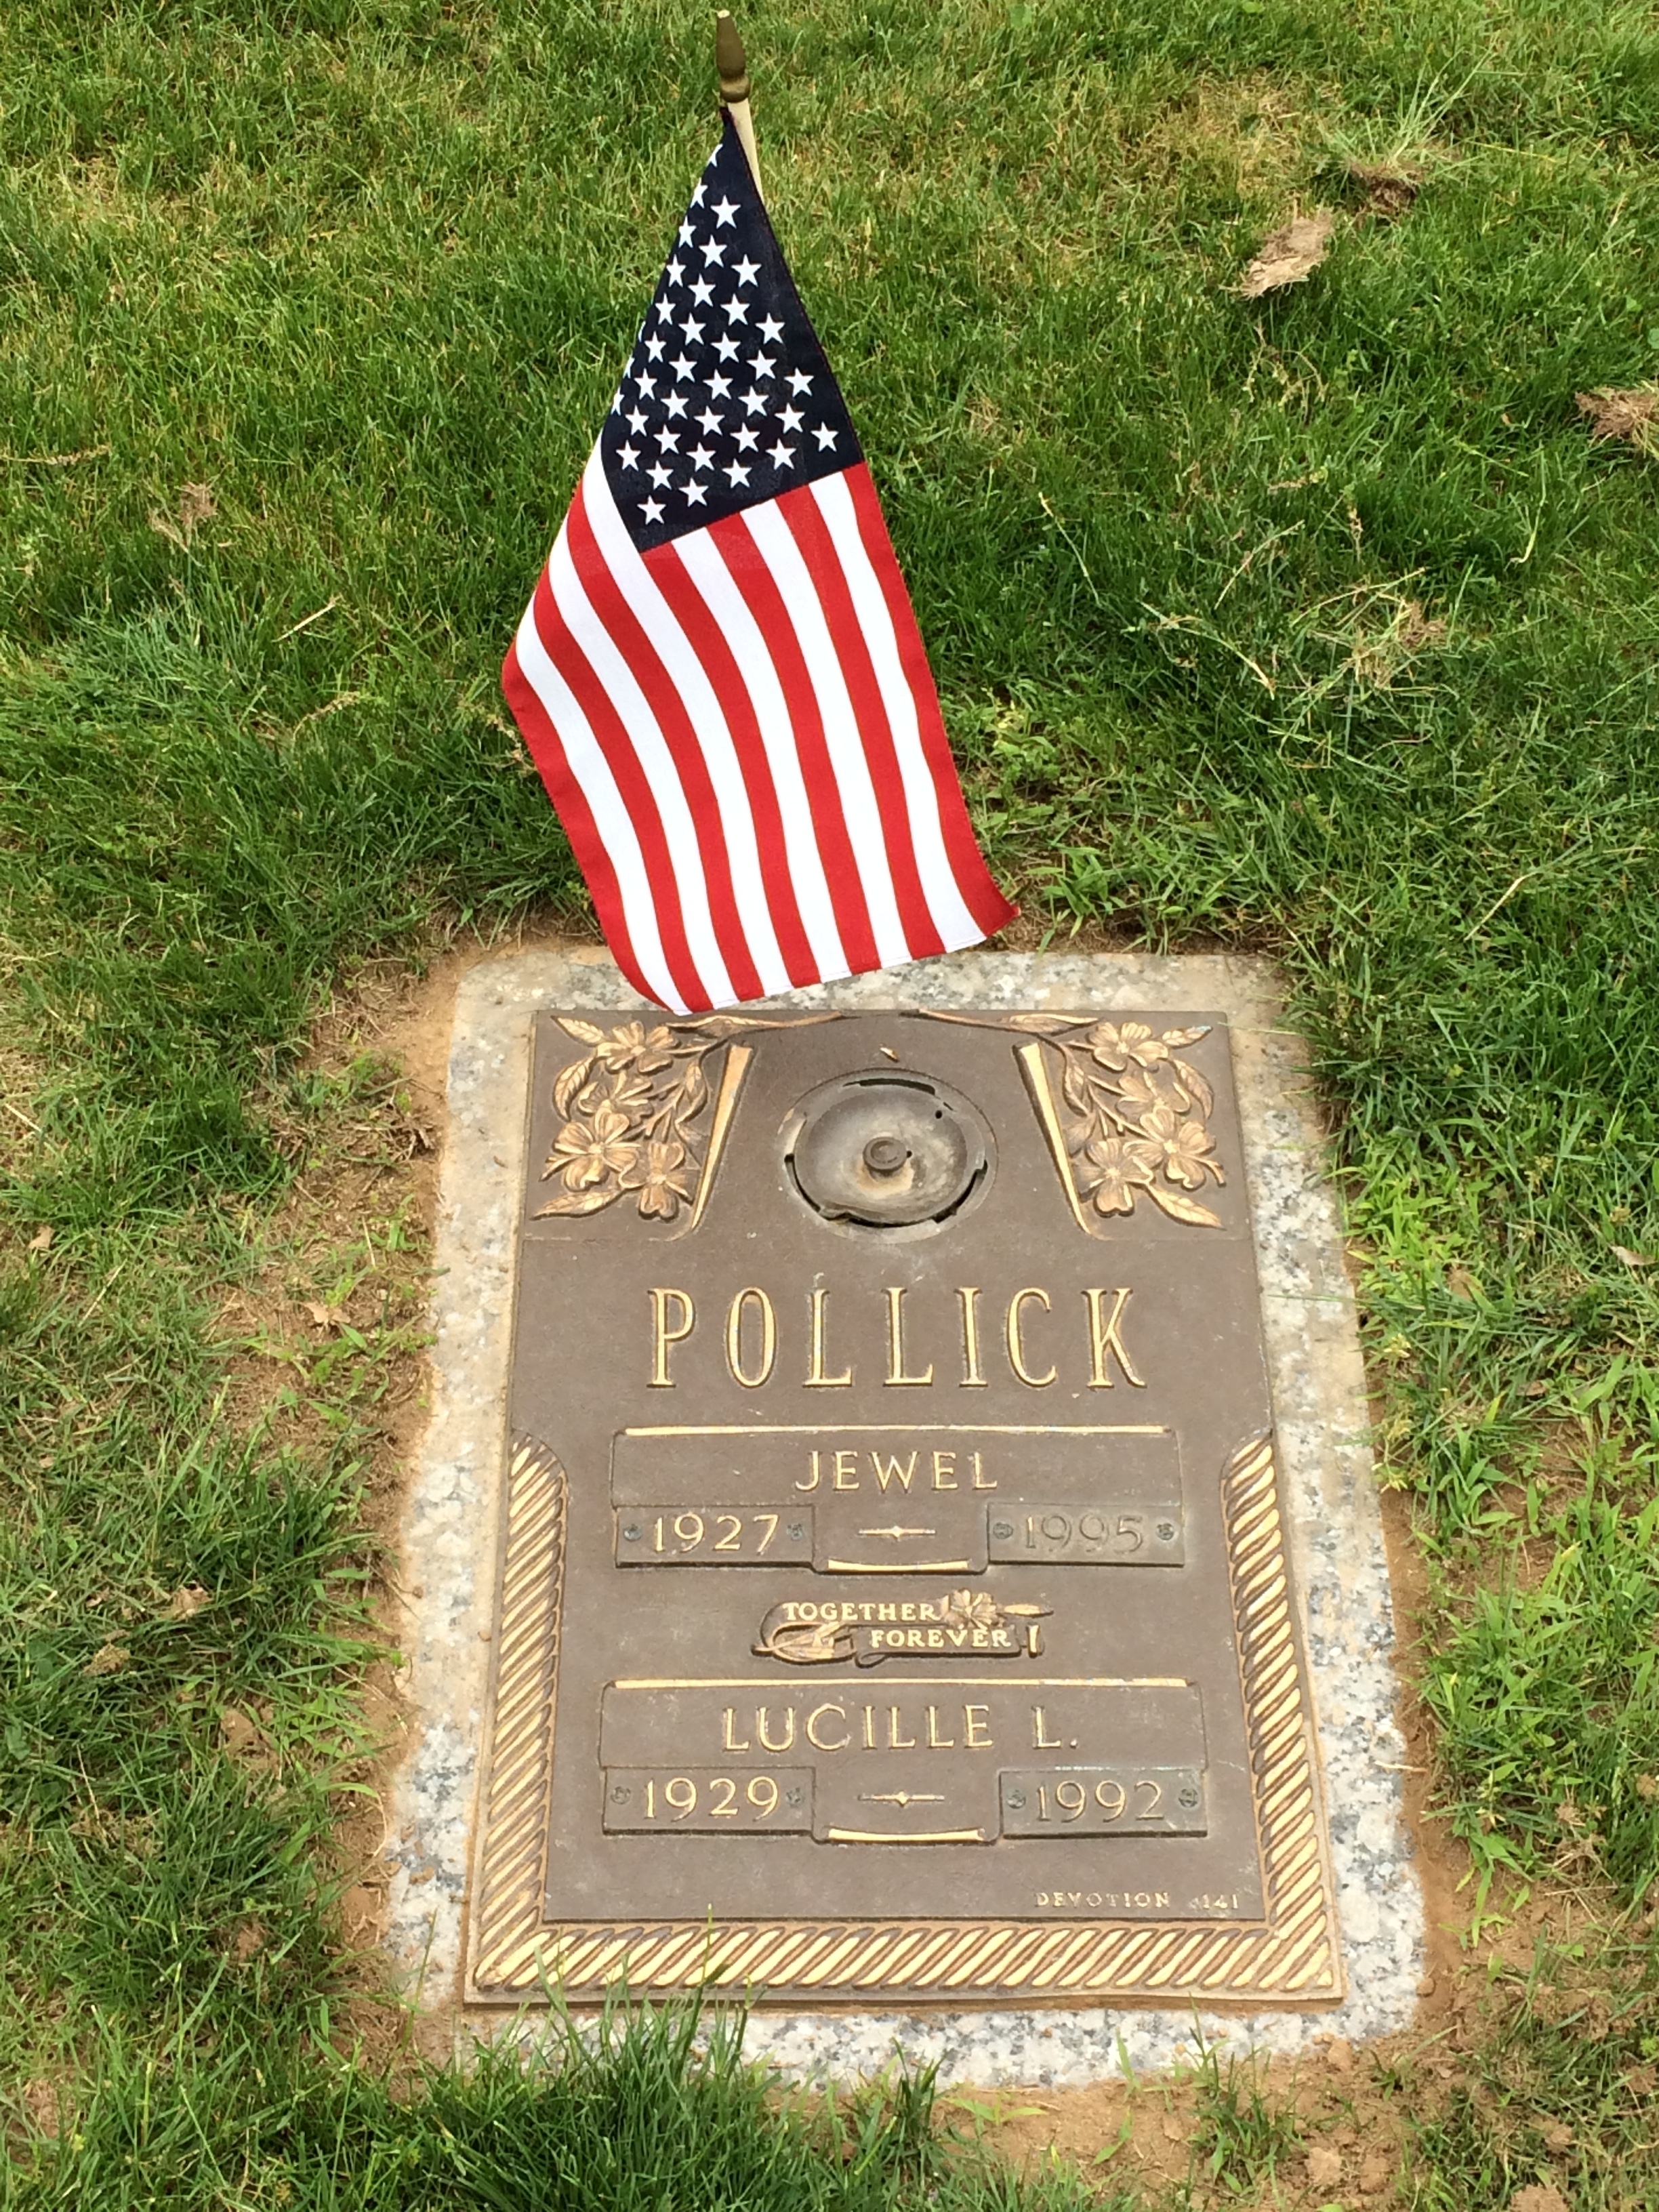 Lucille and Jewell Pollick's gravesite